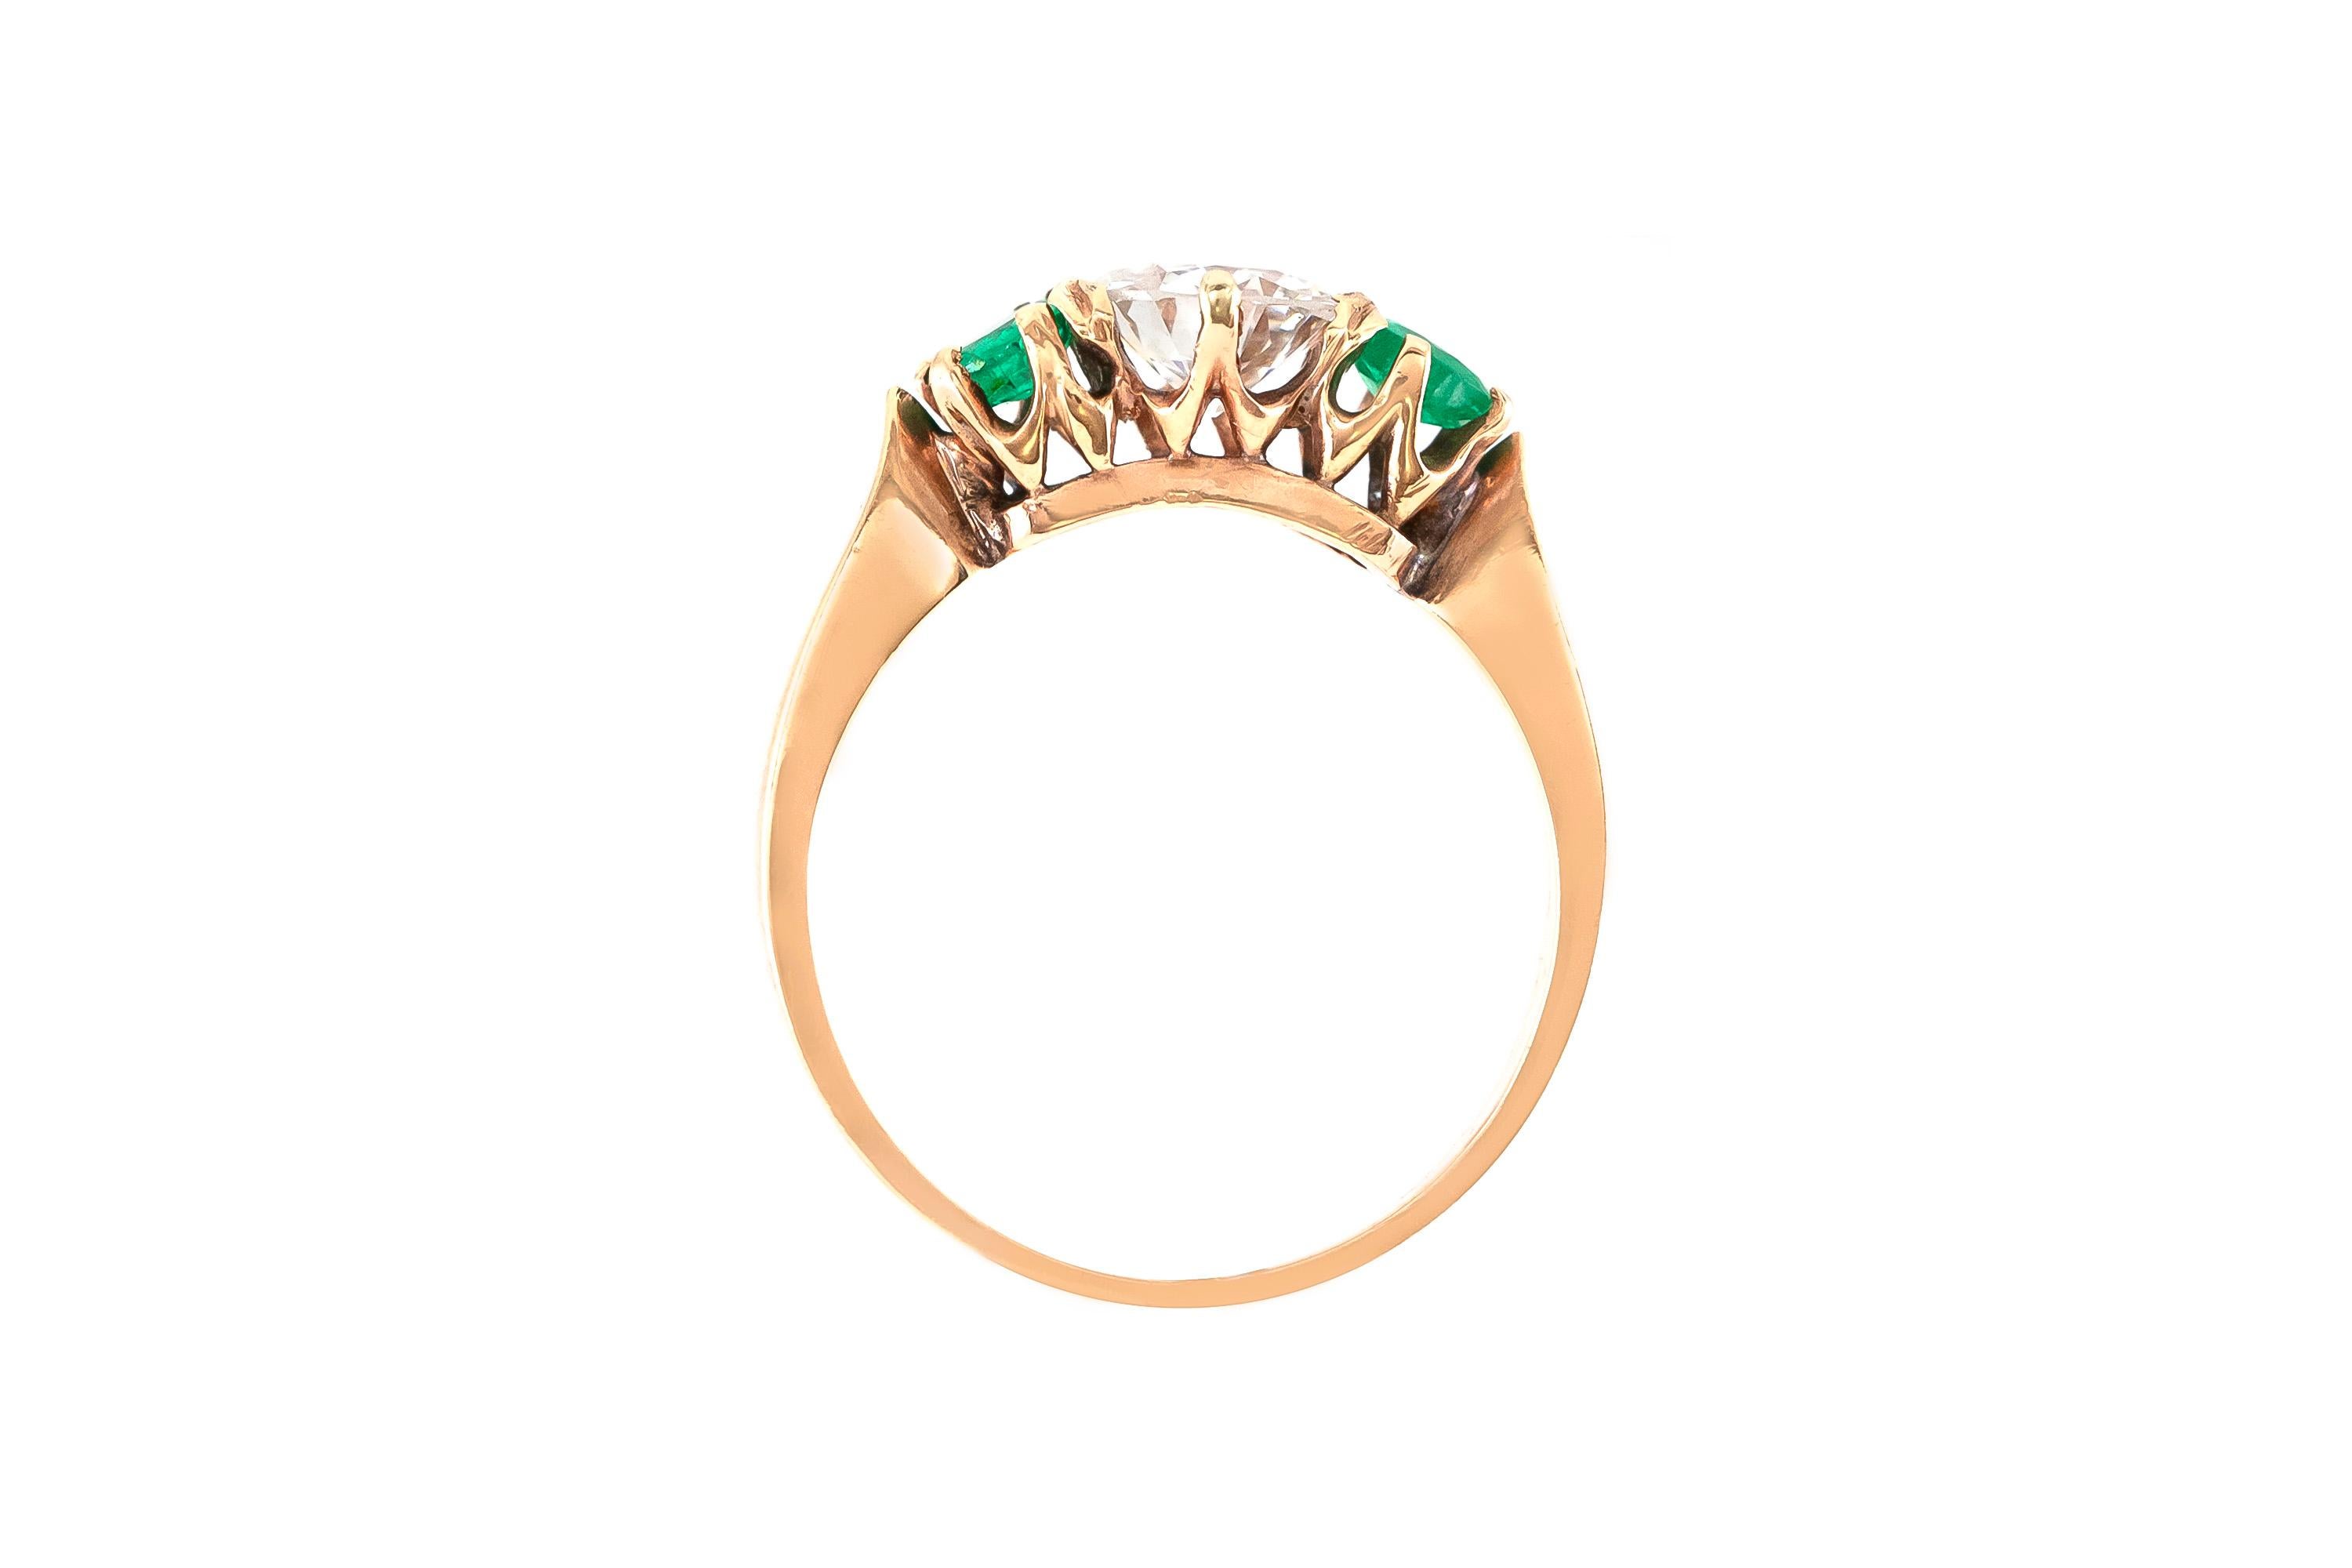 The ring is finely crafted in 14k yellow gold with center dimond weighing approximately total of 0.77 carat Color G and Clarity and with two emerald weighing approximately total of .50 carat.
Circa 1940.